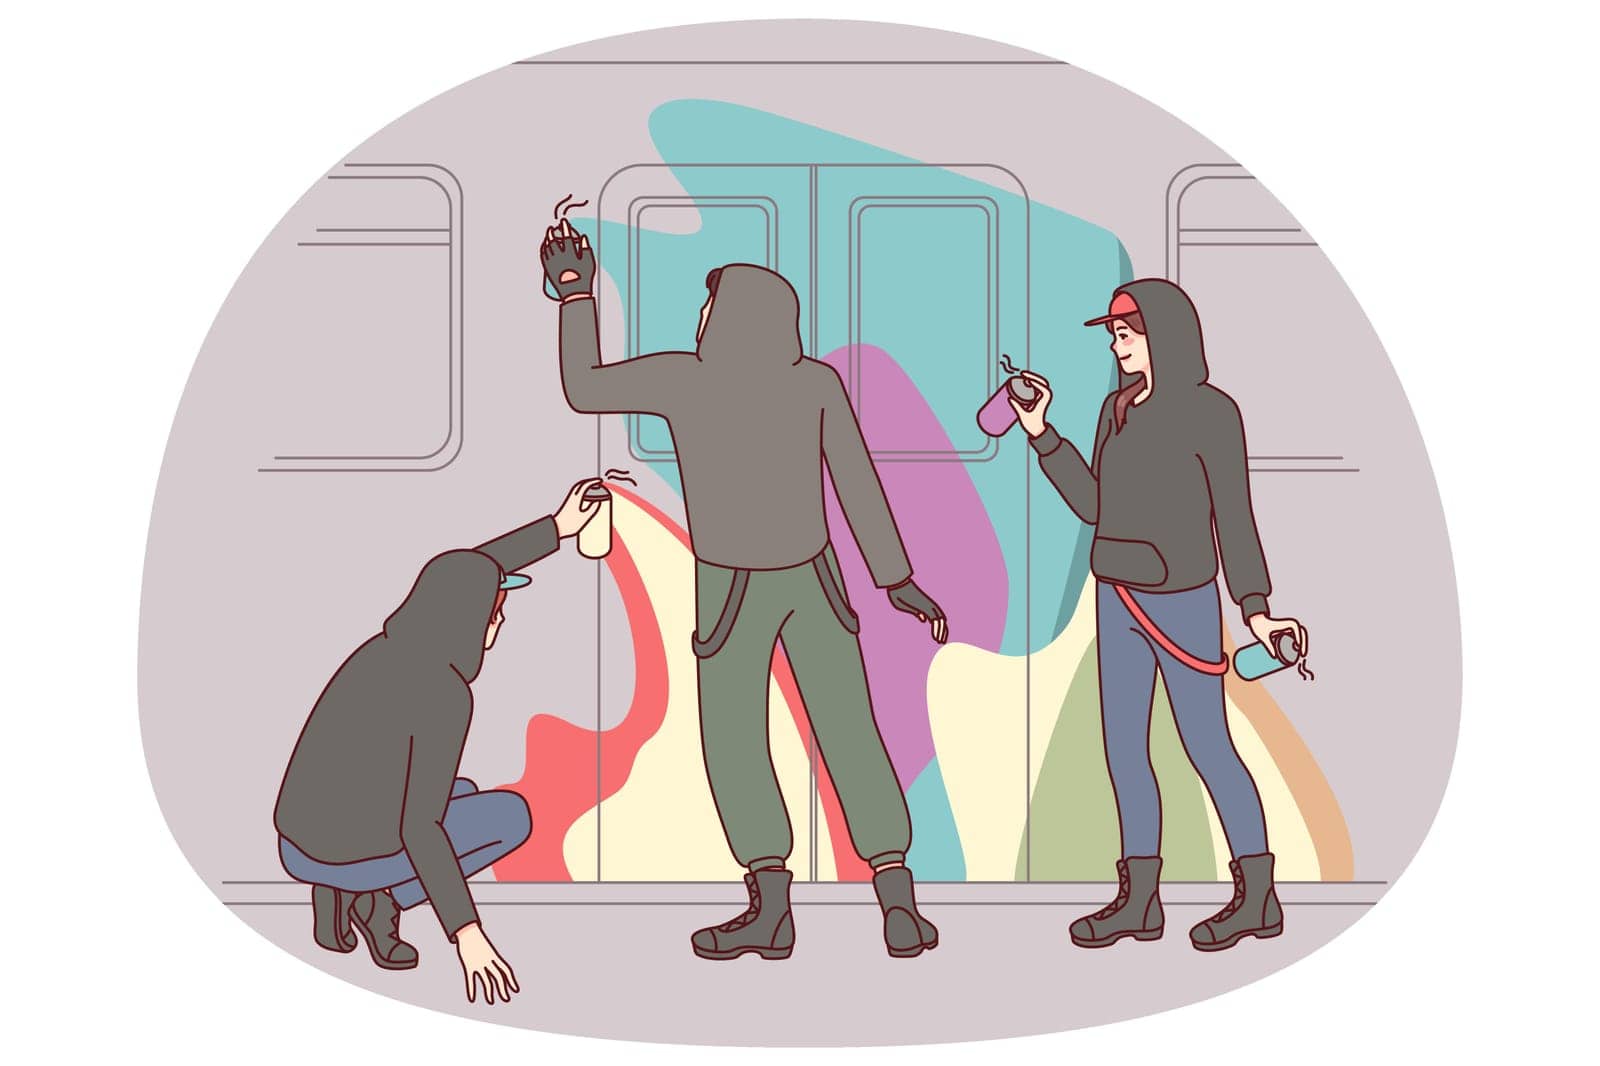 People painting subway train with graffiti. Vandals drawing subculture art with aerosol paints on train. Vandalism and sabotage concept. Vector illustration.